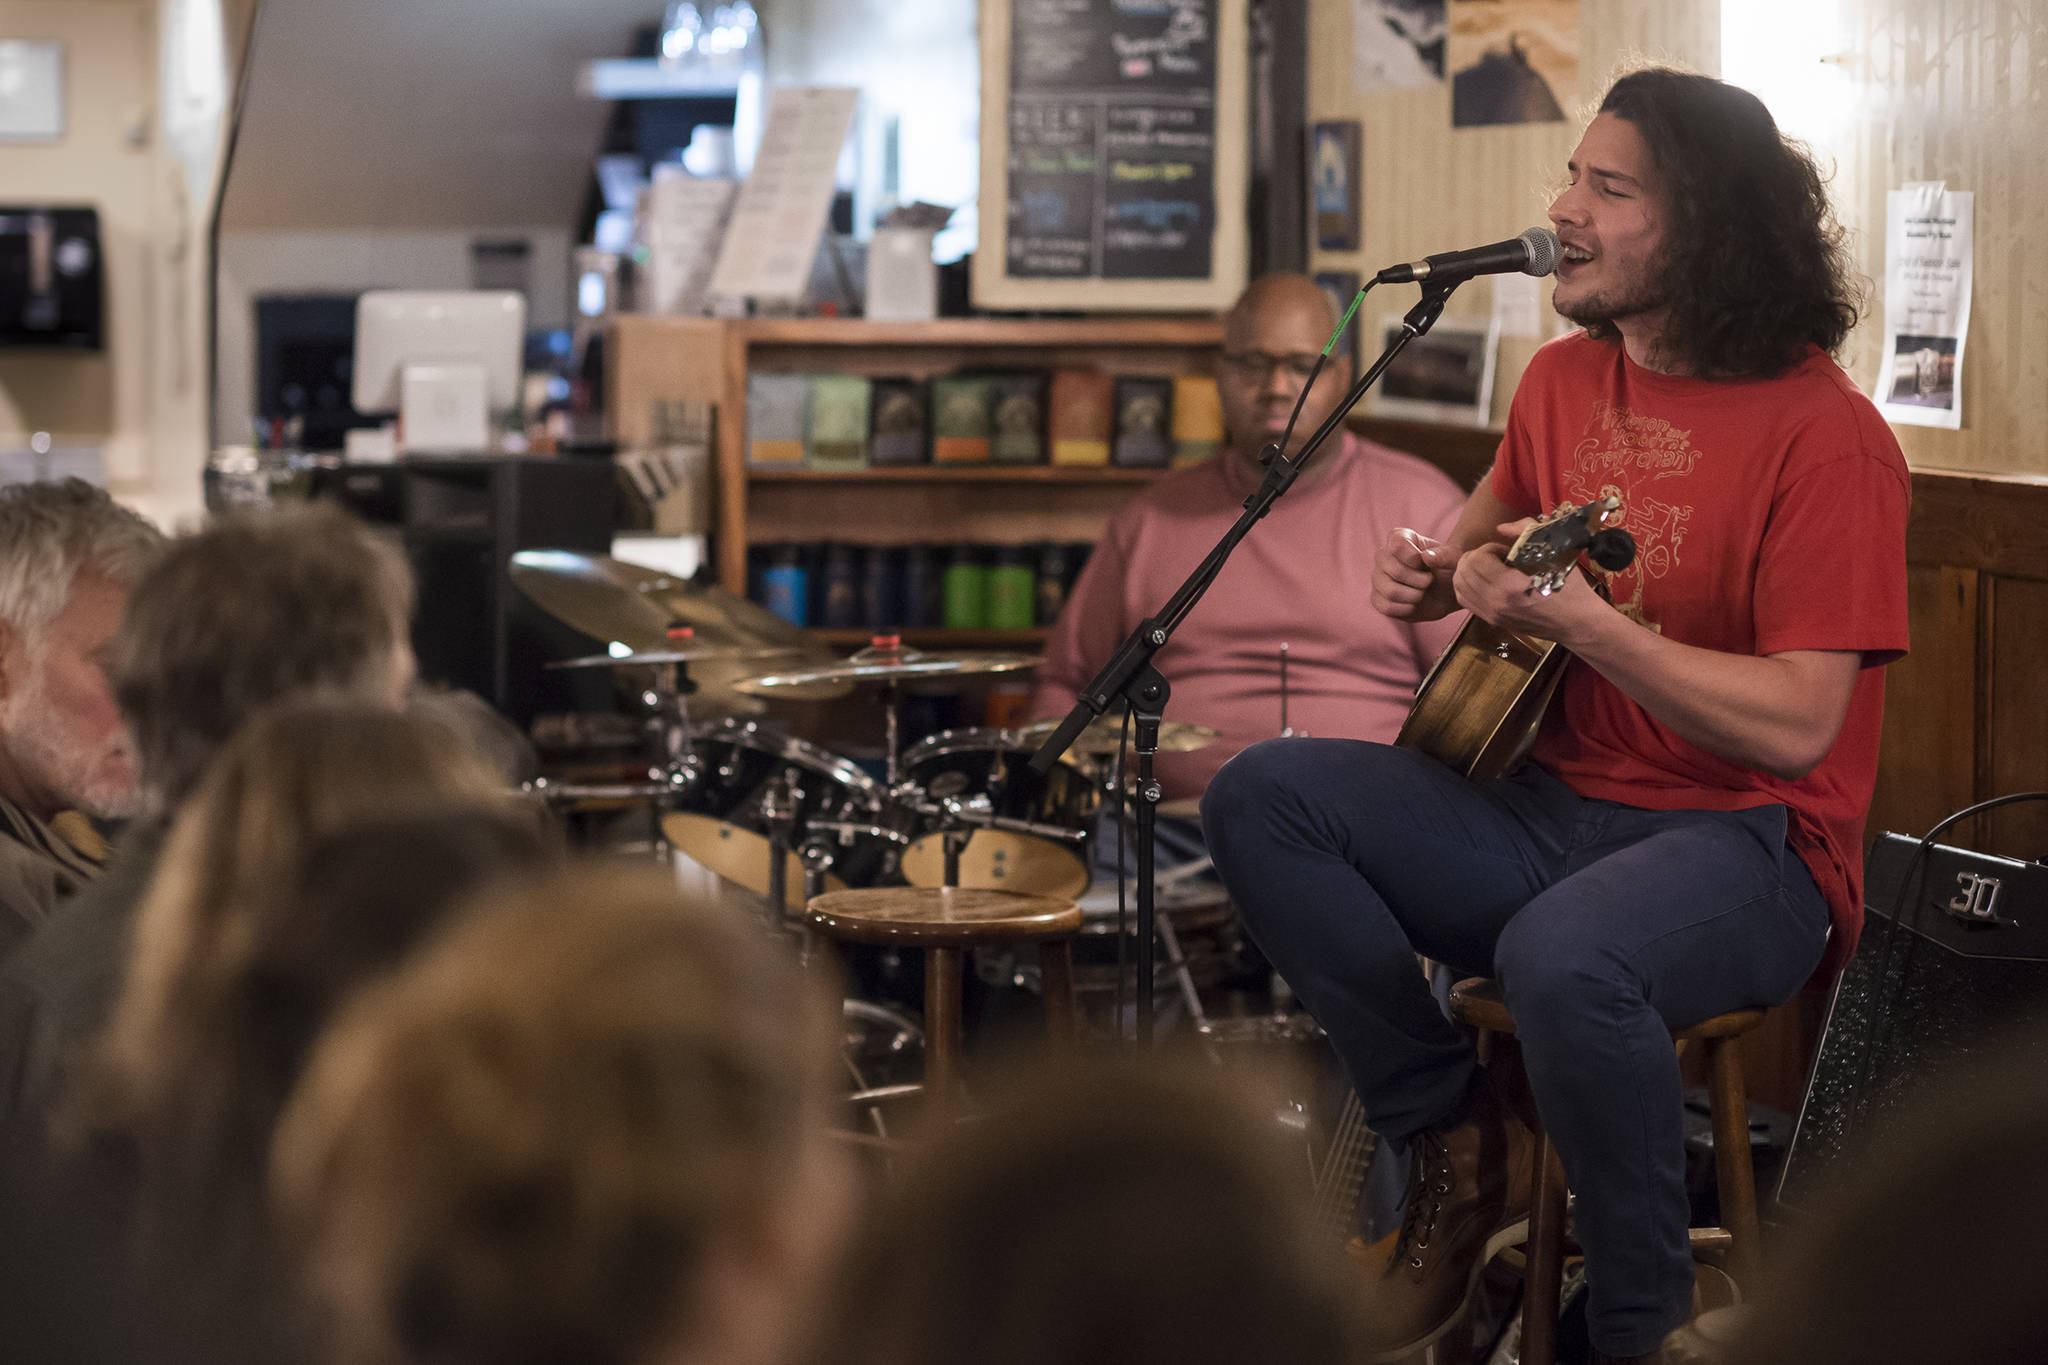 Avery Stewart plays as the featured artist at the open mic at The Rookery on Wednesday, Nov. 20, 2018. He was backed by Jason Cornish on the drum kit, Josh Lockhart on djembe and Jeff Boman on bass. (Michael Penn | Juneau Empire)